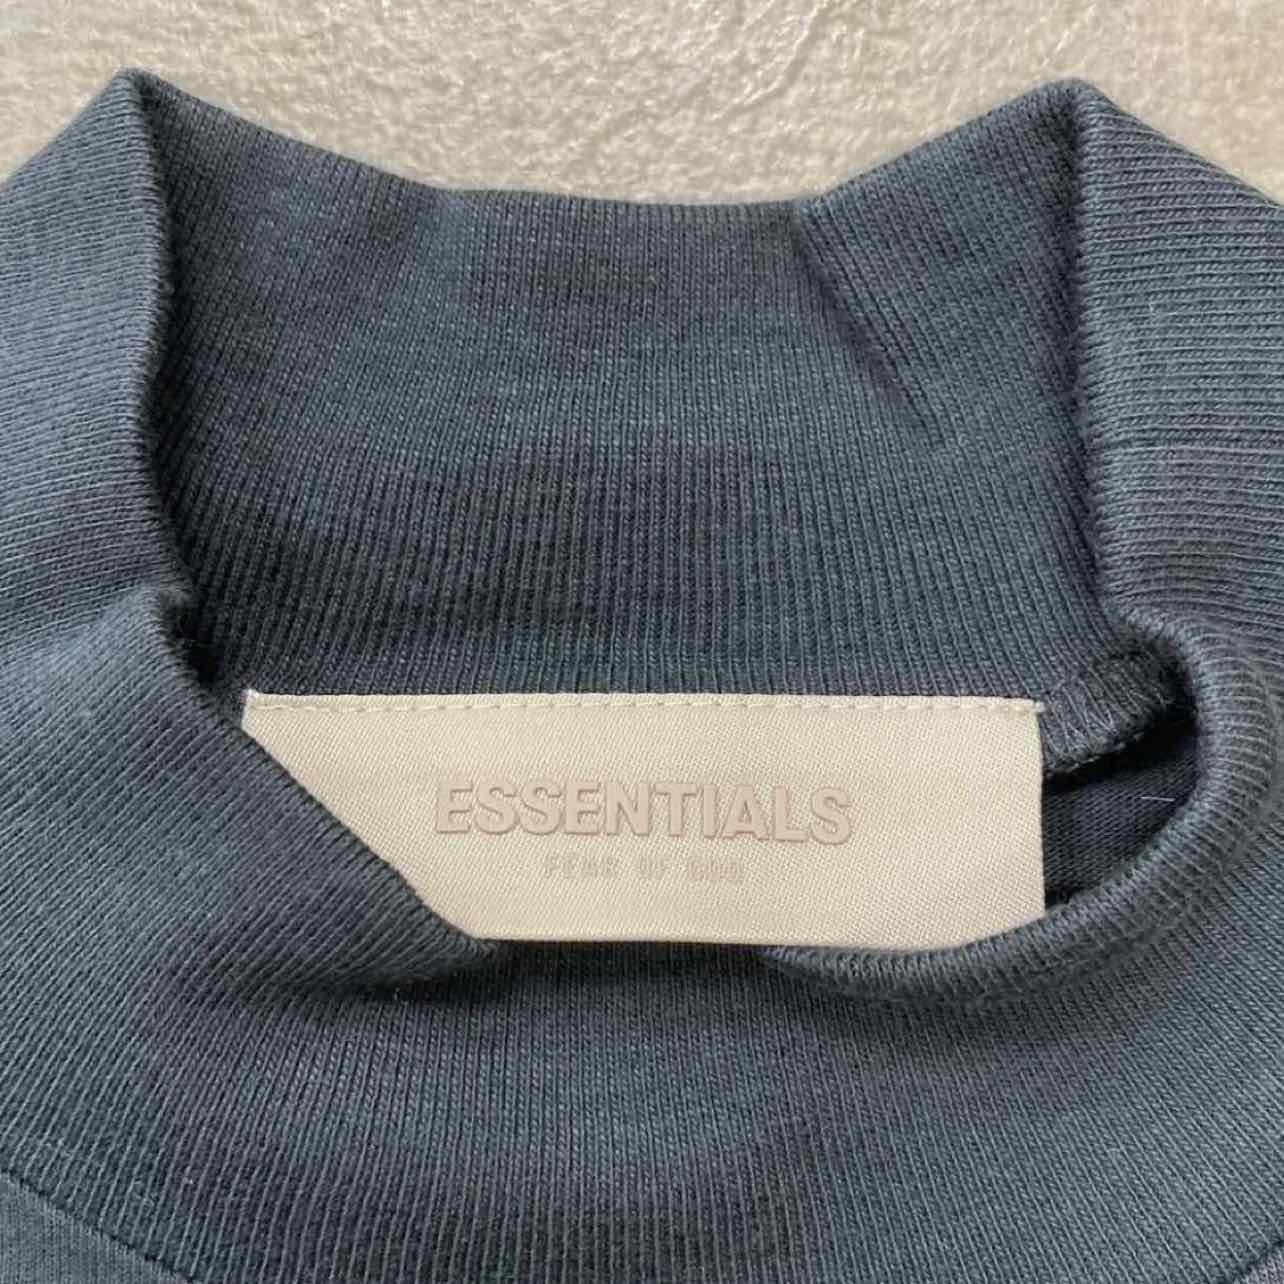 Fear of God Long Sleeve &quot;ESSENTIALS&quot; Stretch Limo New Size M